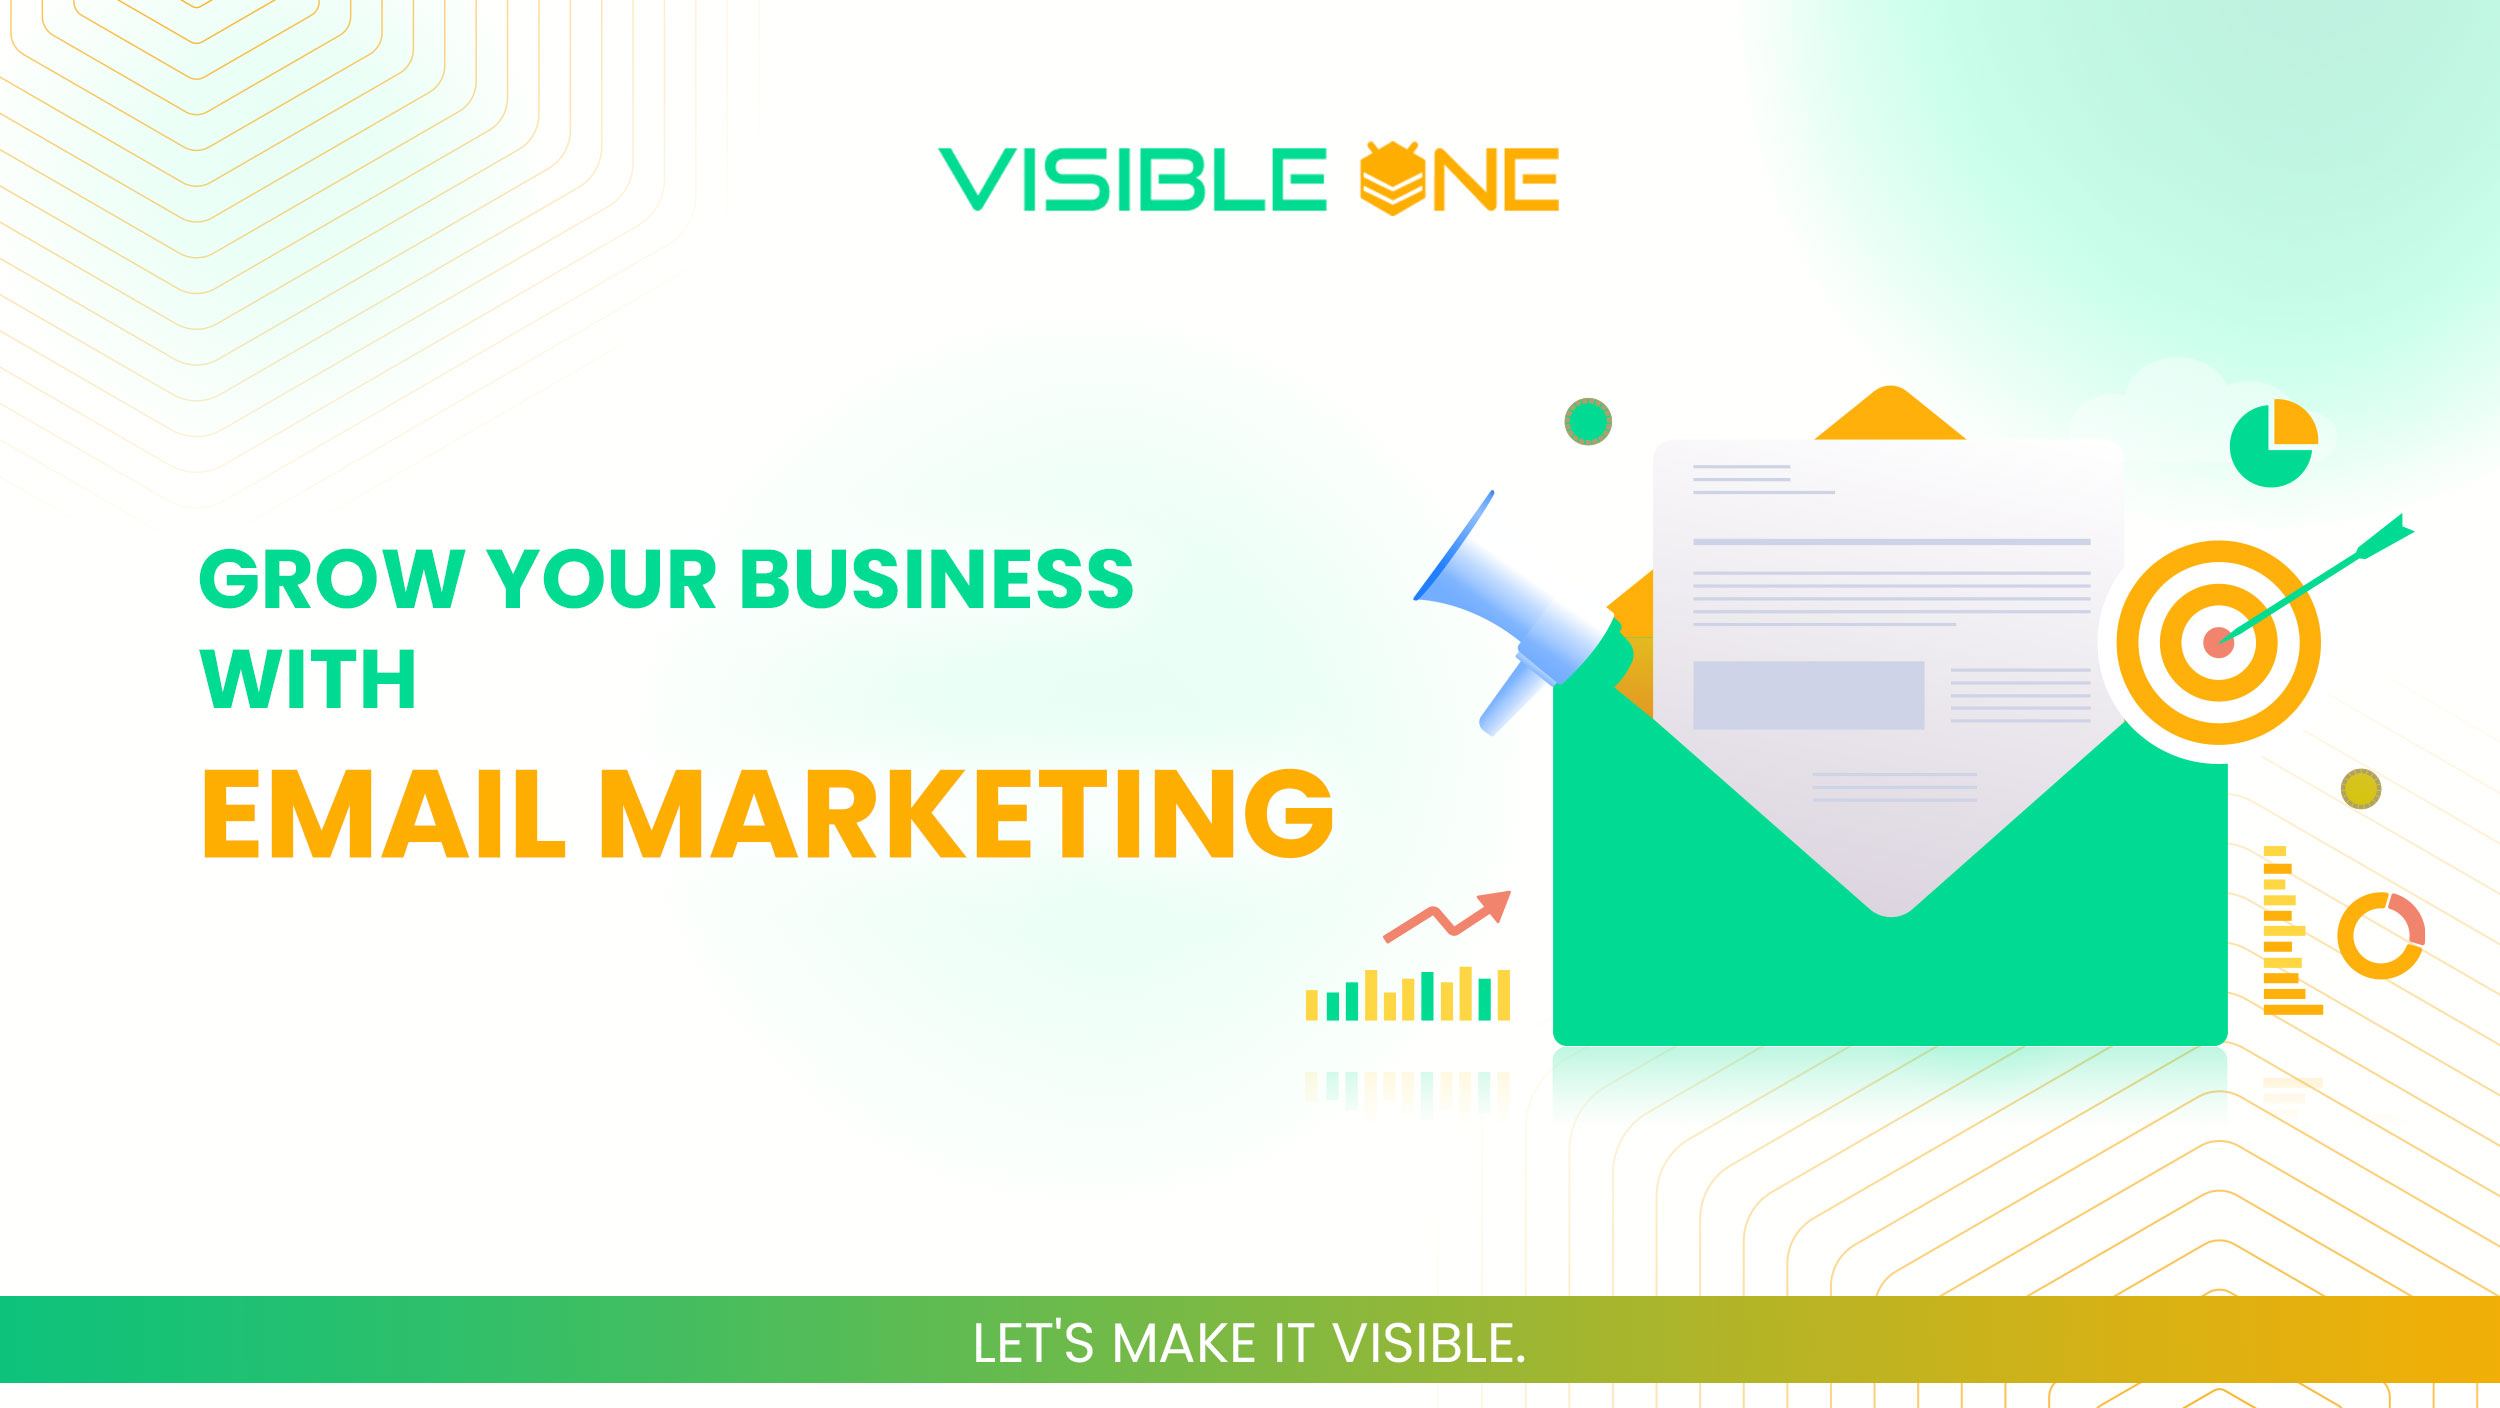 Grow Your Business With Email Marketing